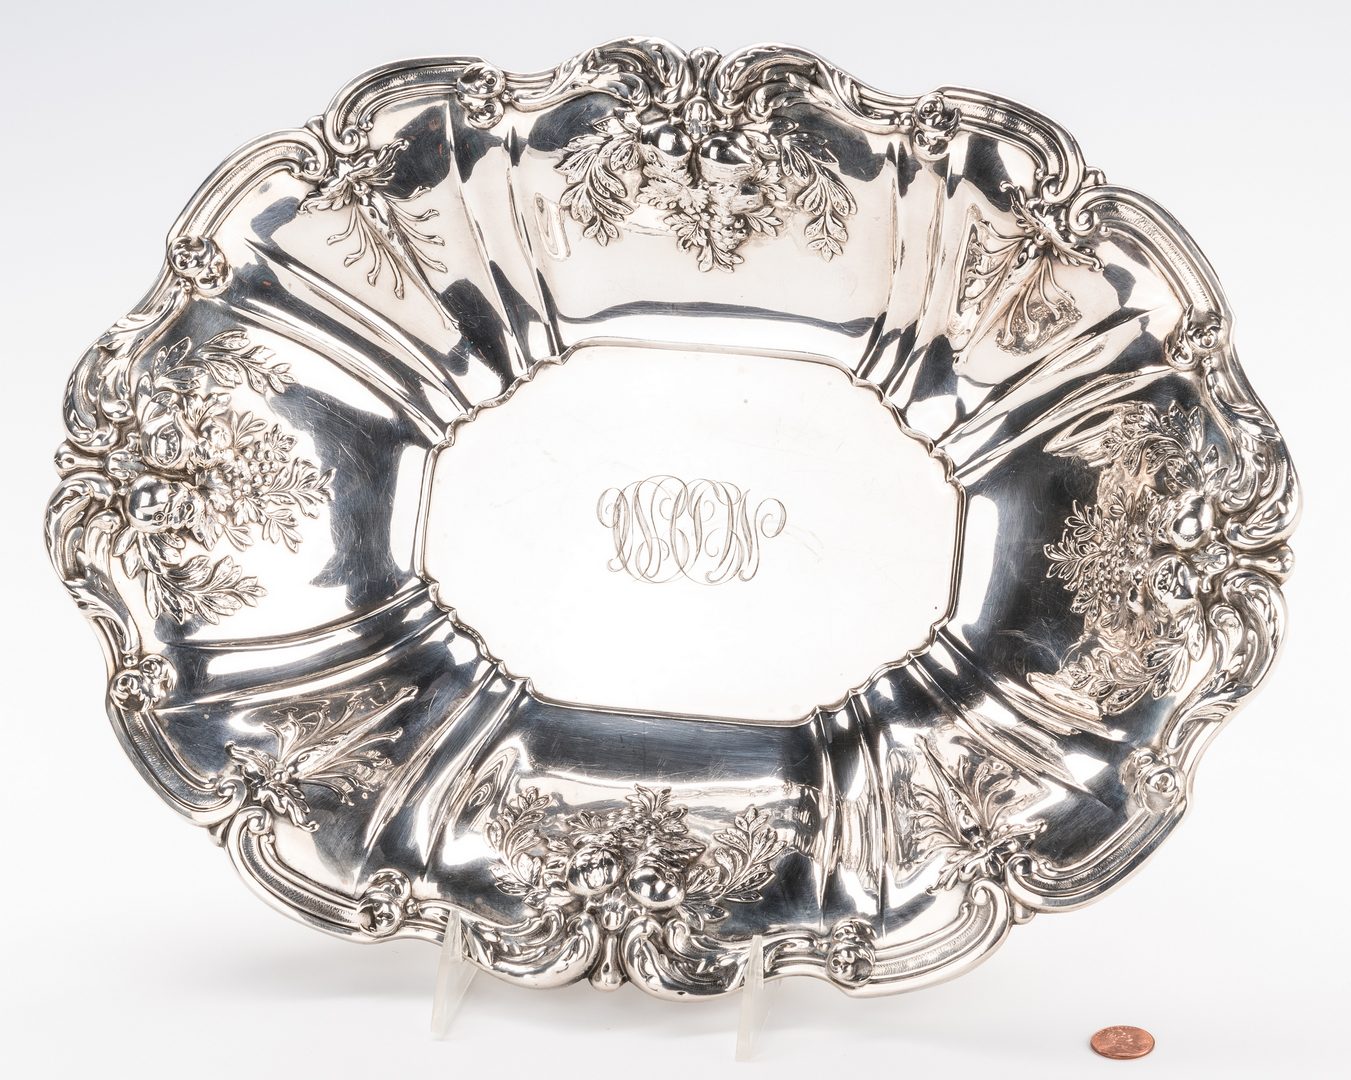 Lot 401: Francis I Sterling Centerpiece Bowl